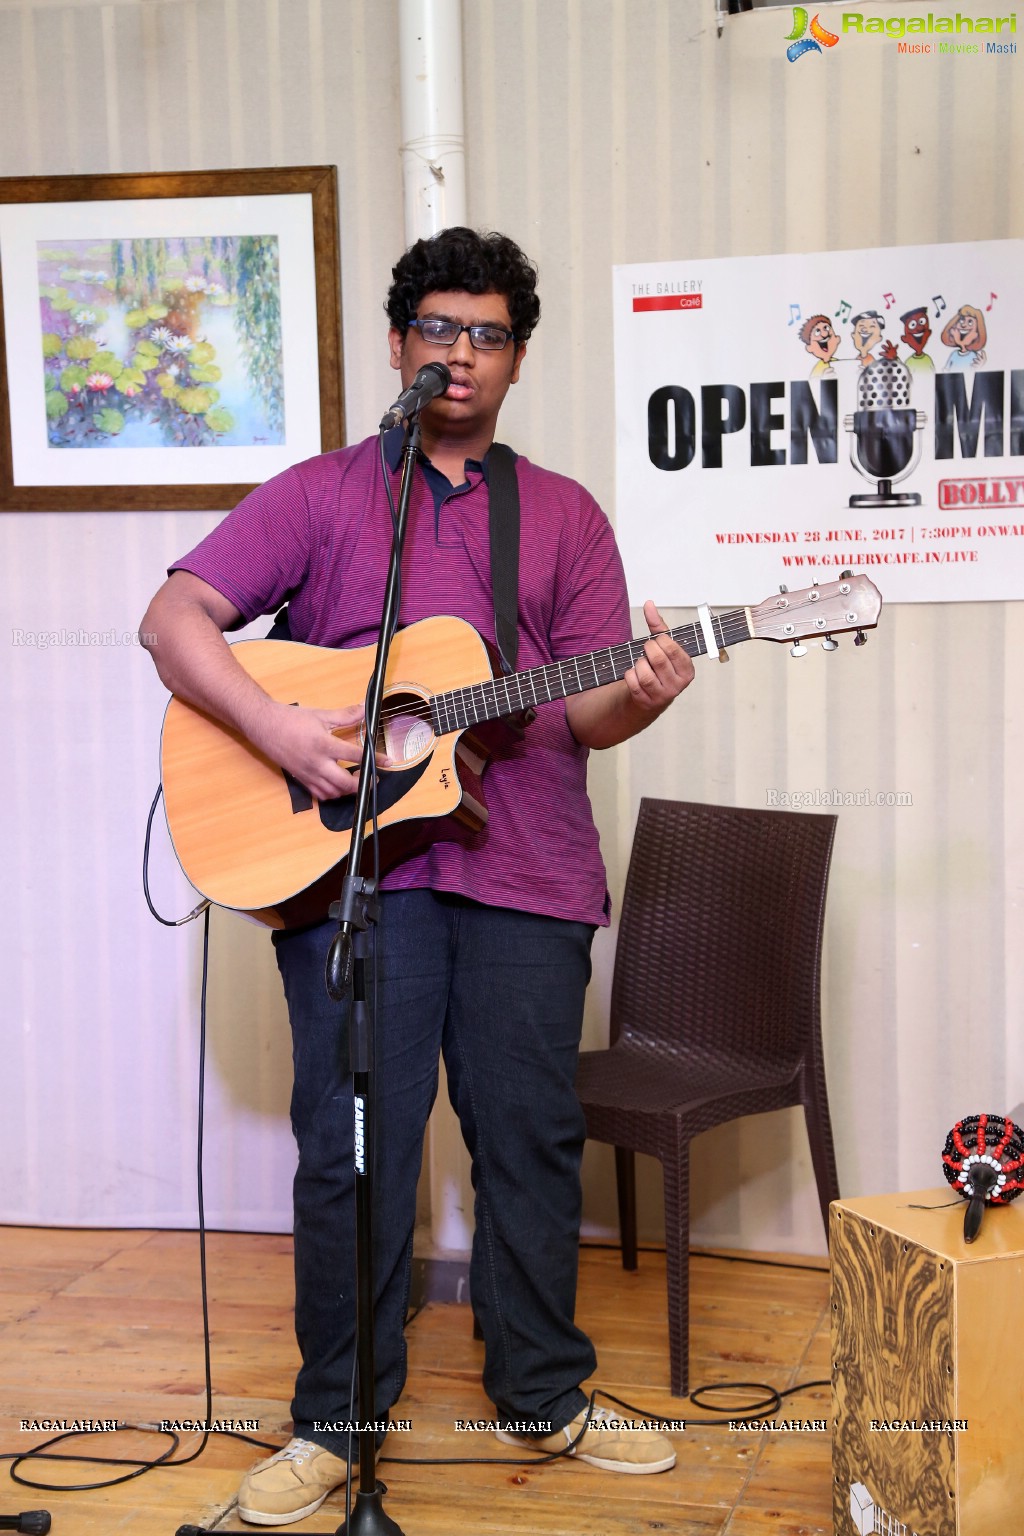 Open Mic Bollywood at The Gallery Cafe